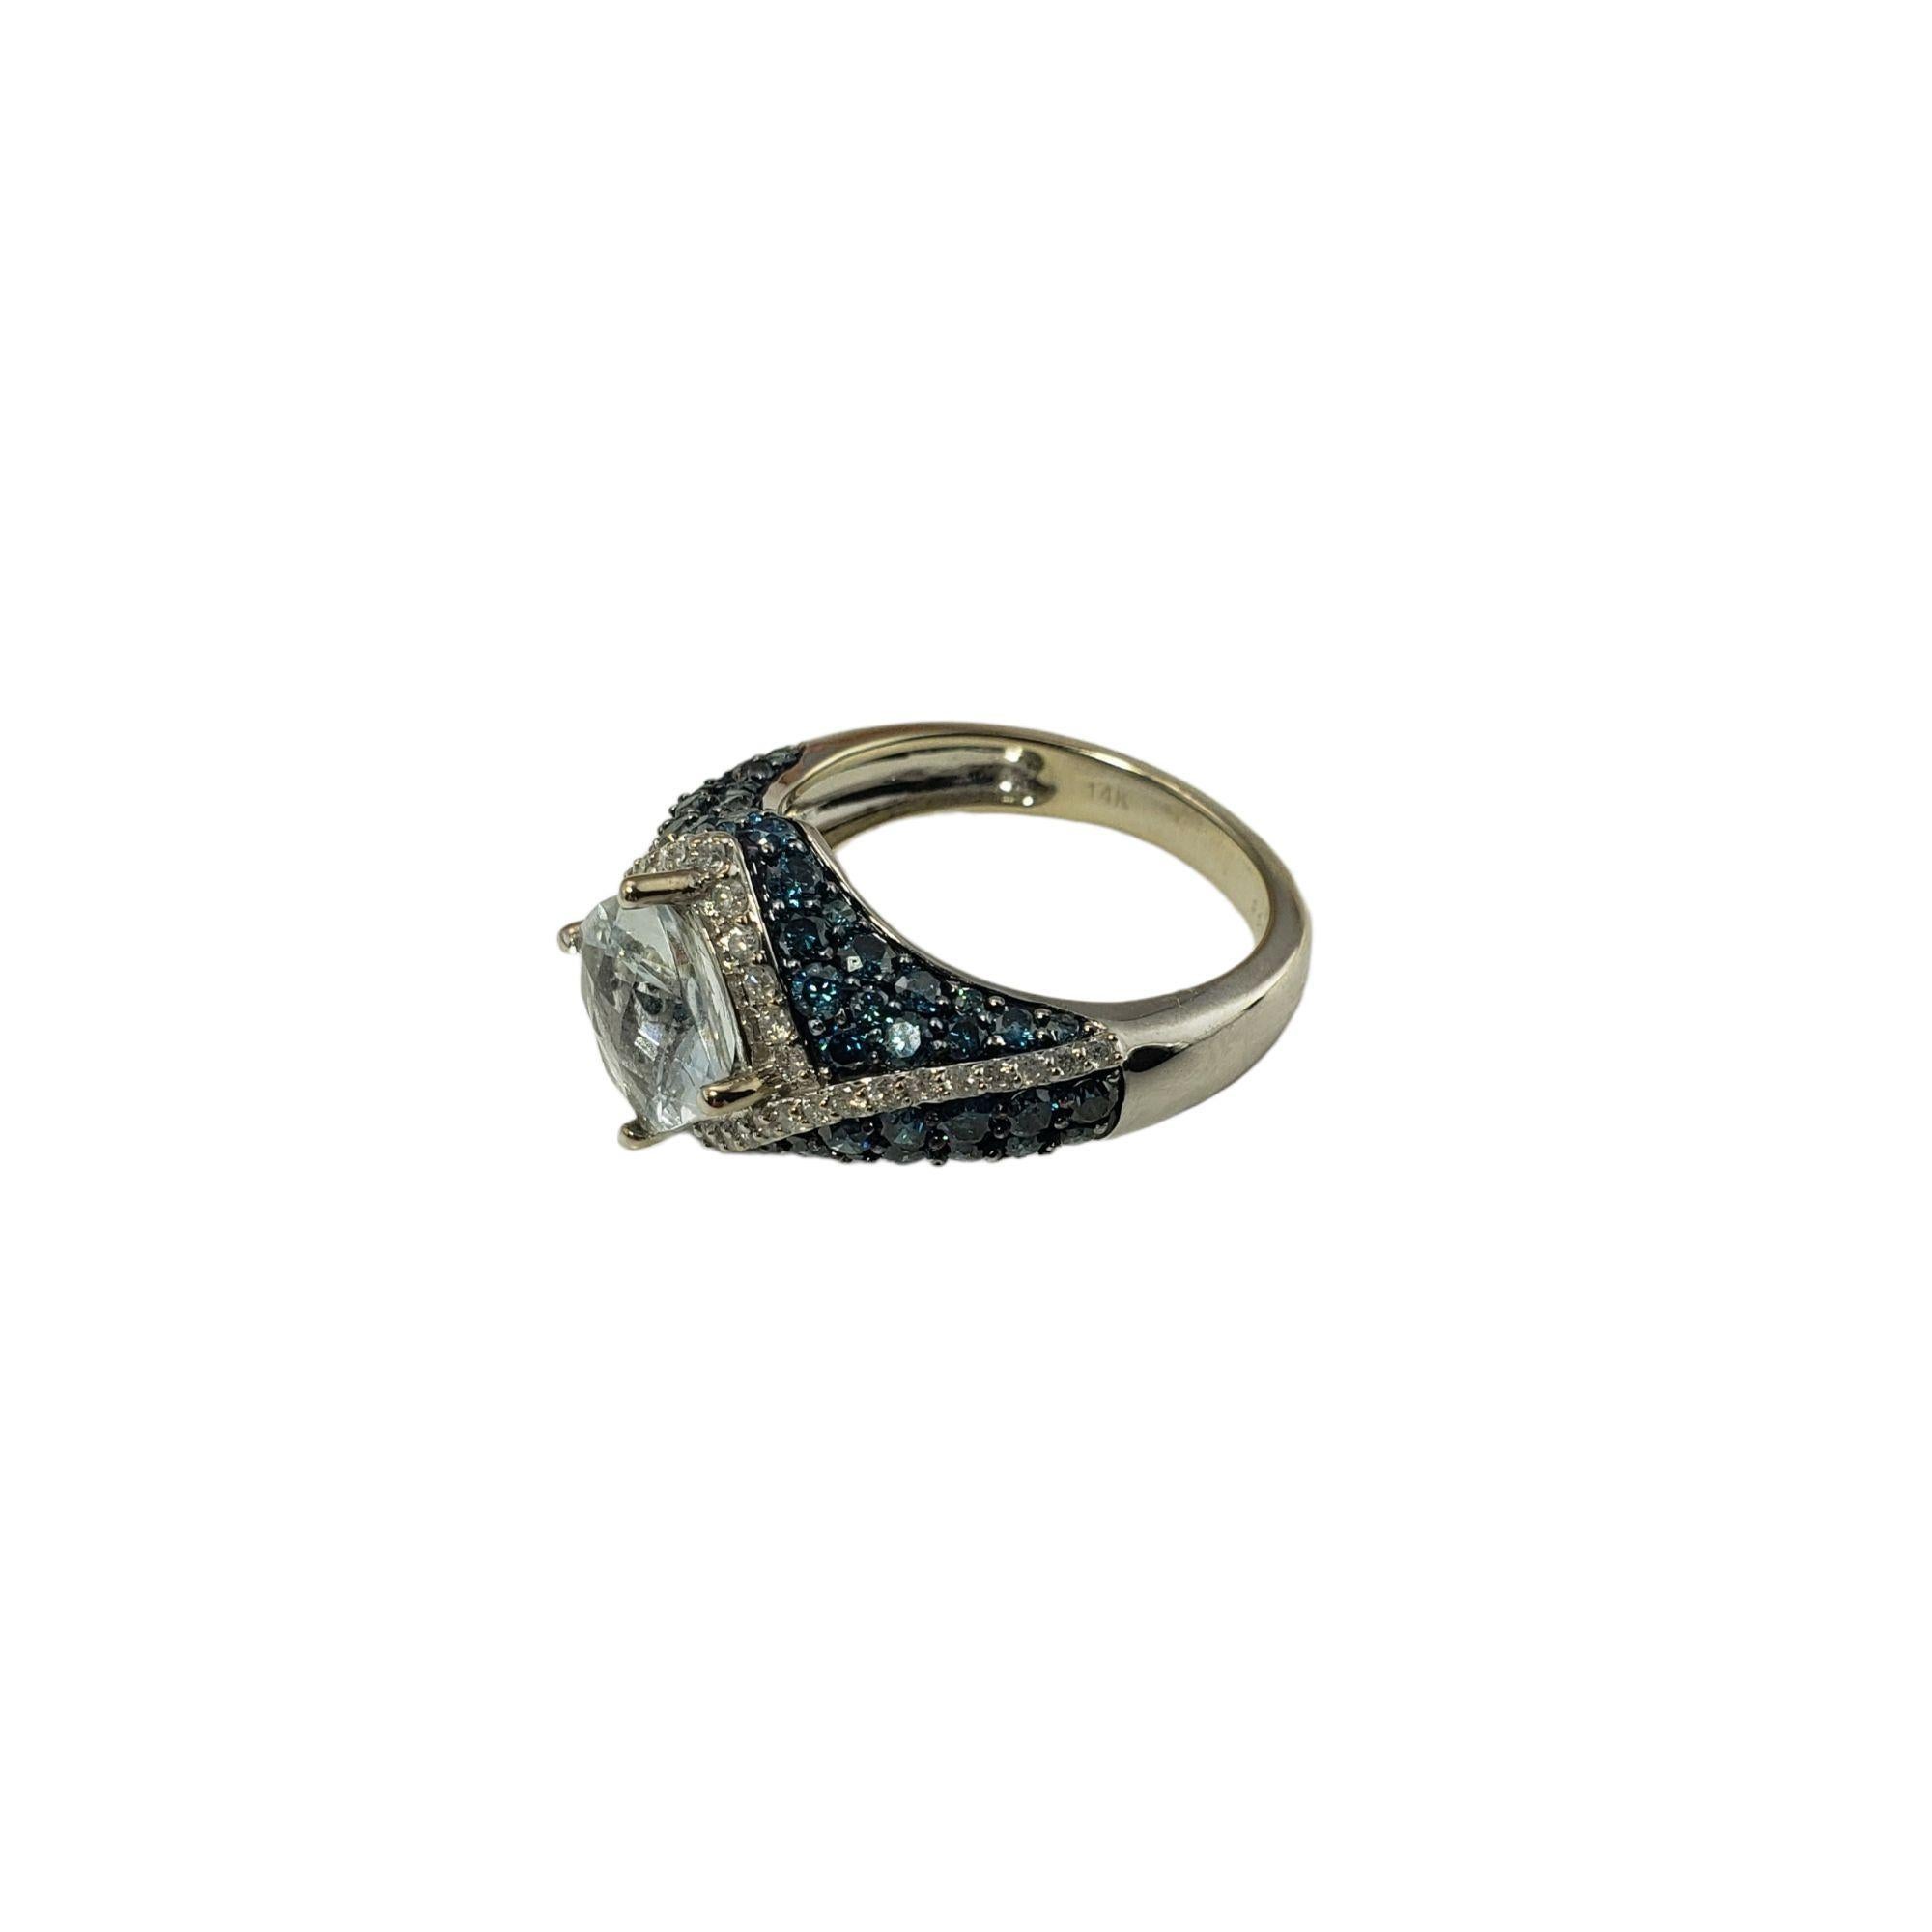 14K White Gold White Topaz Diamond Ring Size 7 #15753 In Good Condition For Sale In Washington Depot, CT